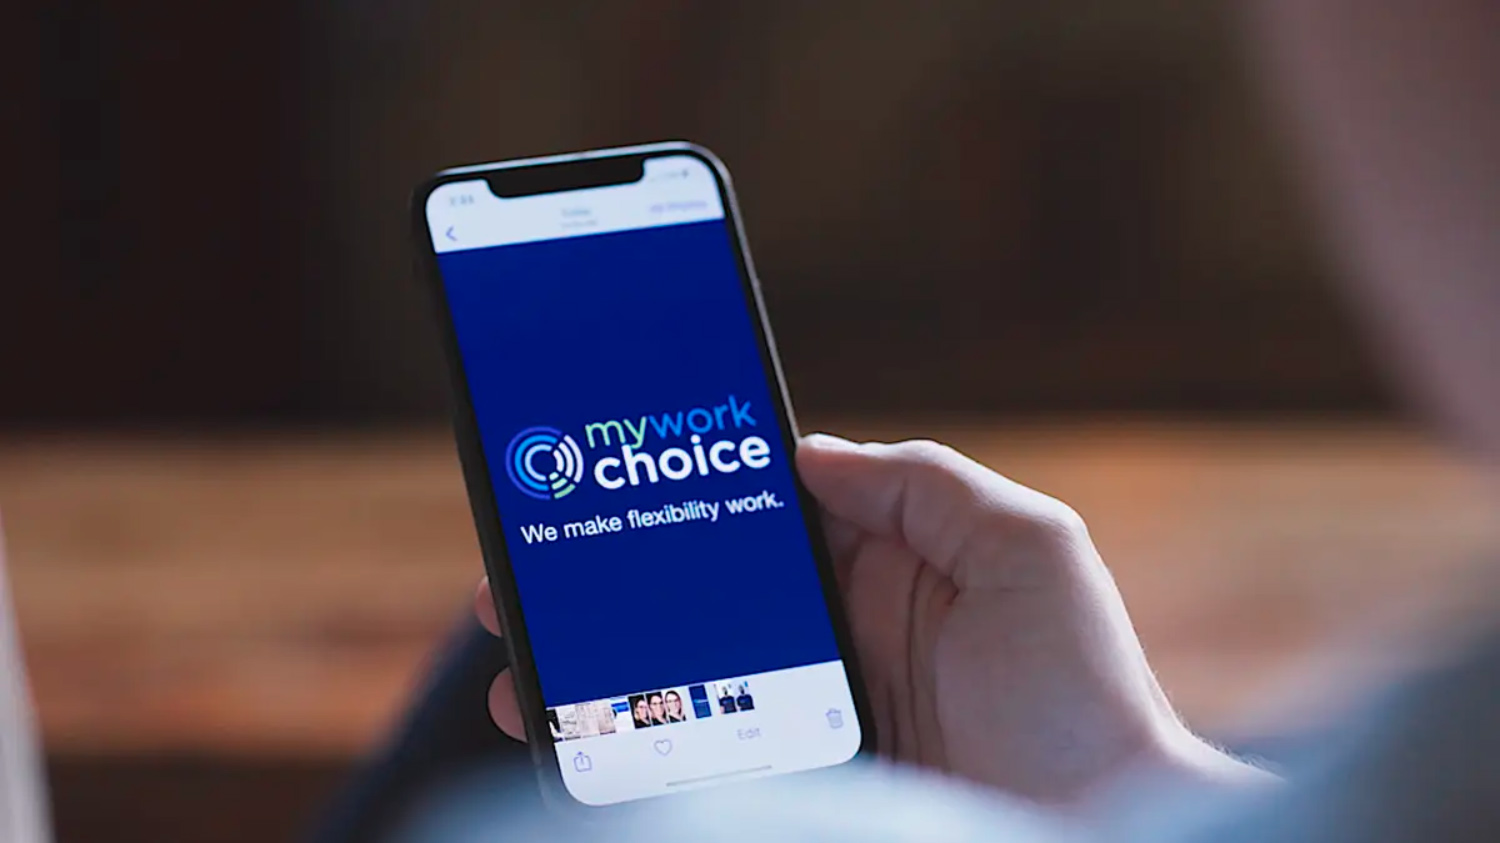 A three-year old disrupter in the staffing space, MyWorkChoice is seeing a surge in companies interested in partnering and using the company's innovative, flexible schedule format to meet demand and expand their workforce during the COVID-19 crisis.